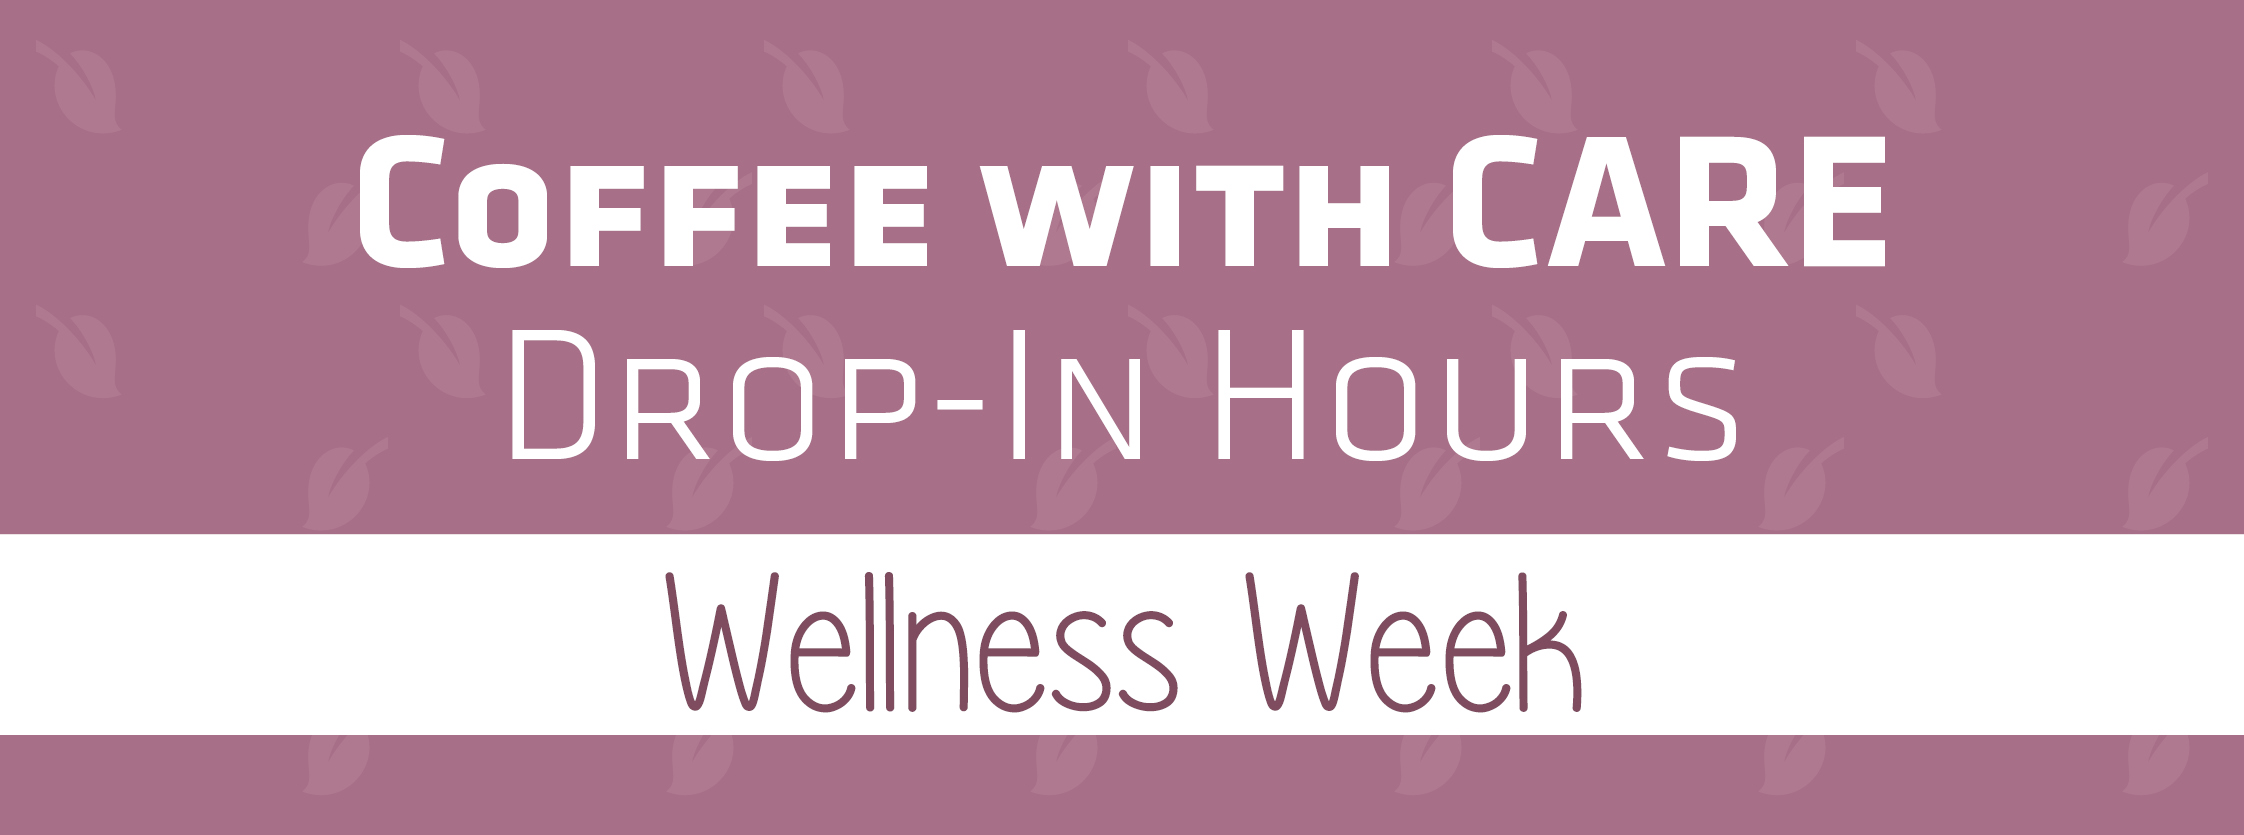 Coffee with CARE | Drop-In Hours | Wellness Week